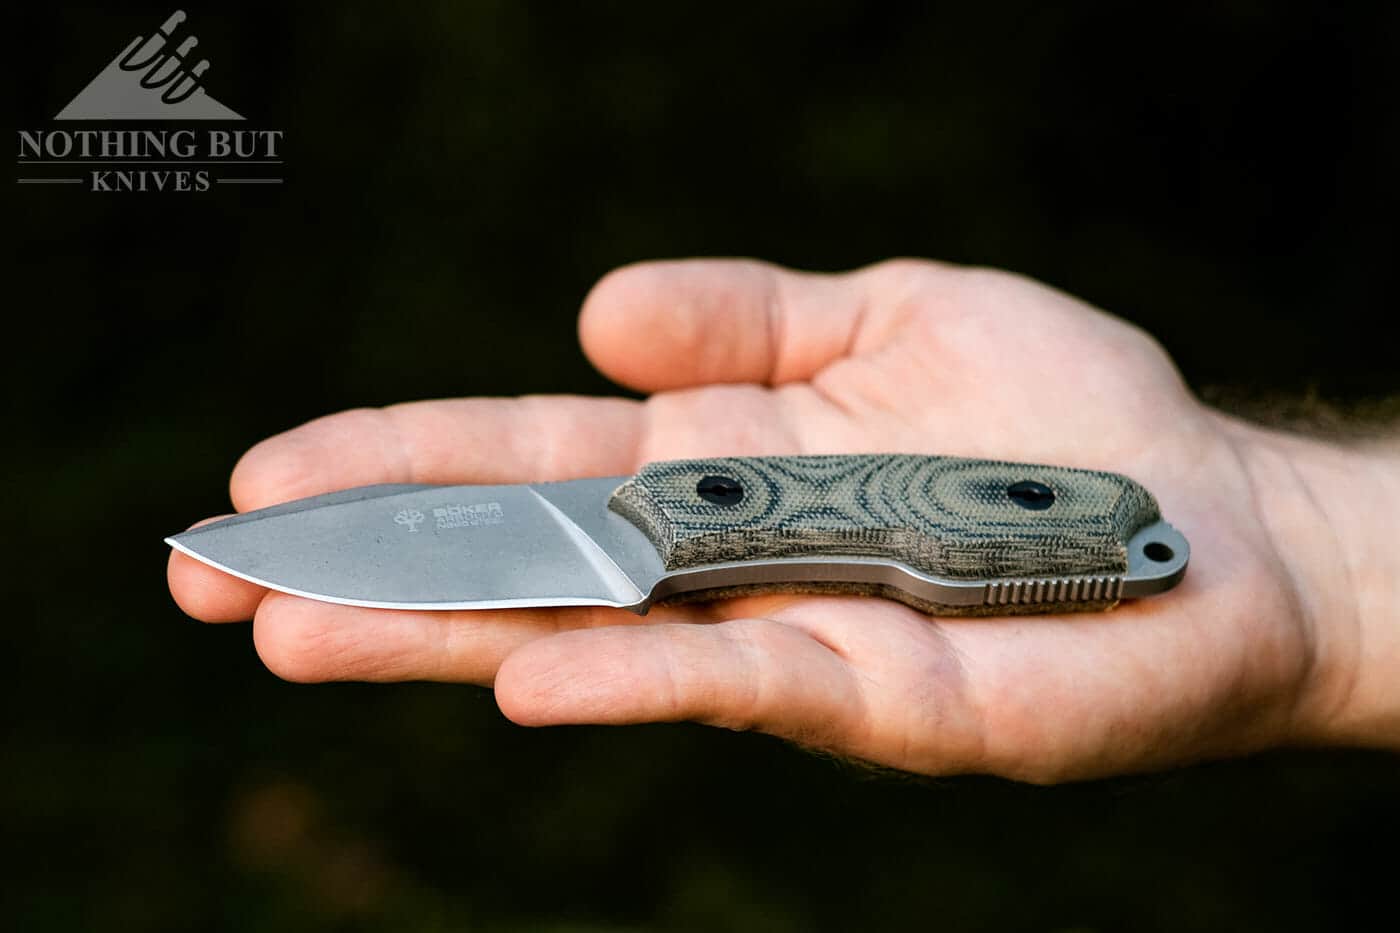 The Boker Arbolito El Heroe is small and tough.